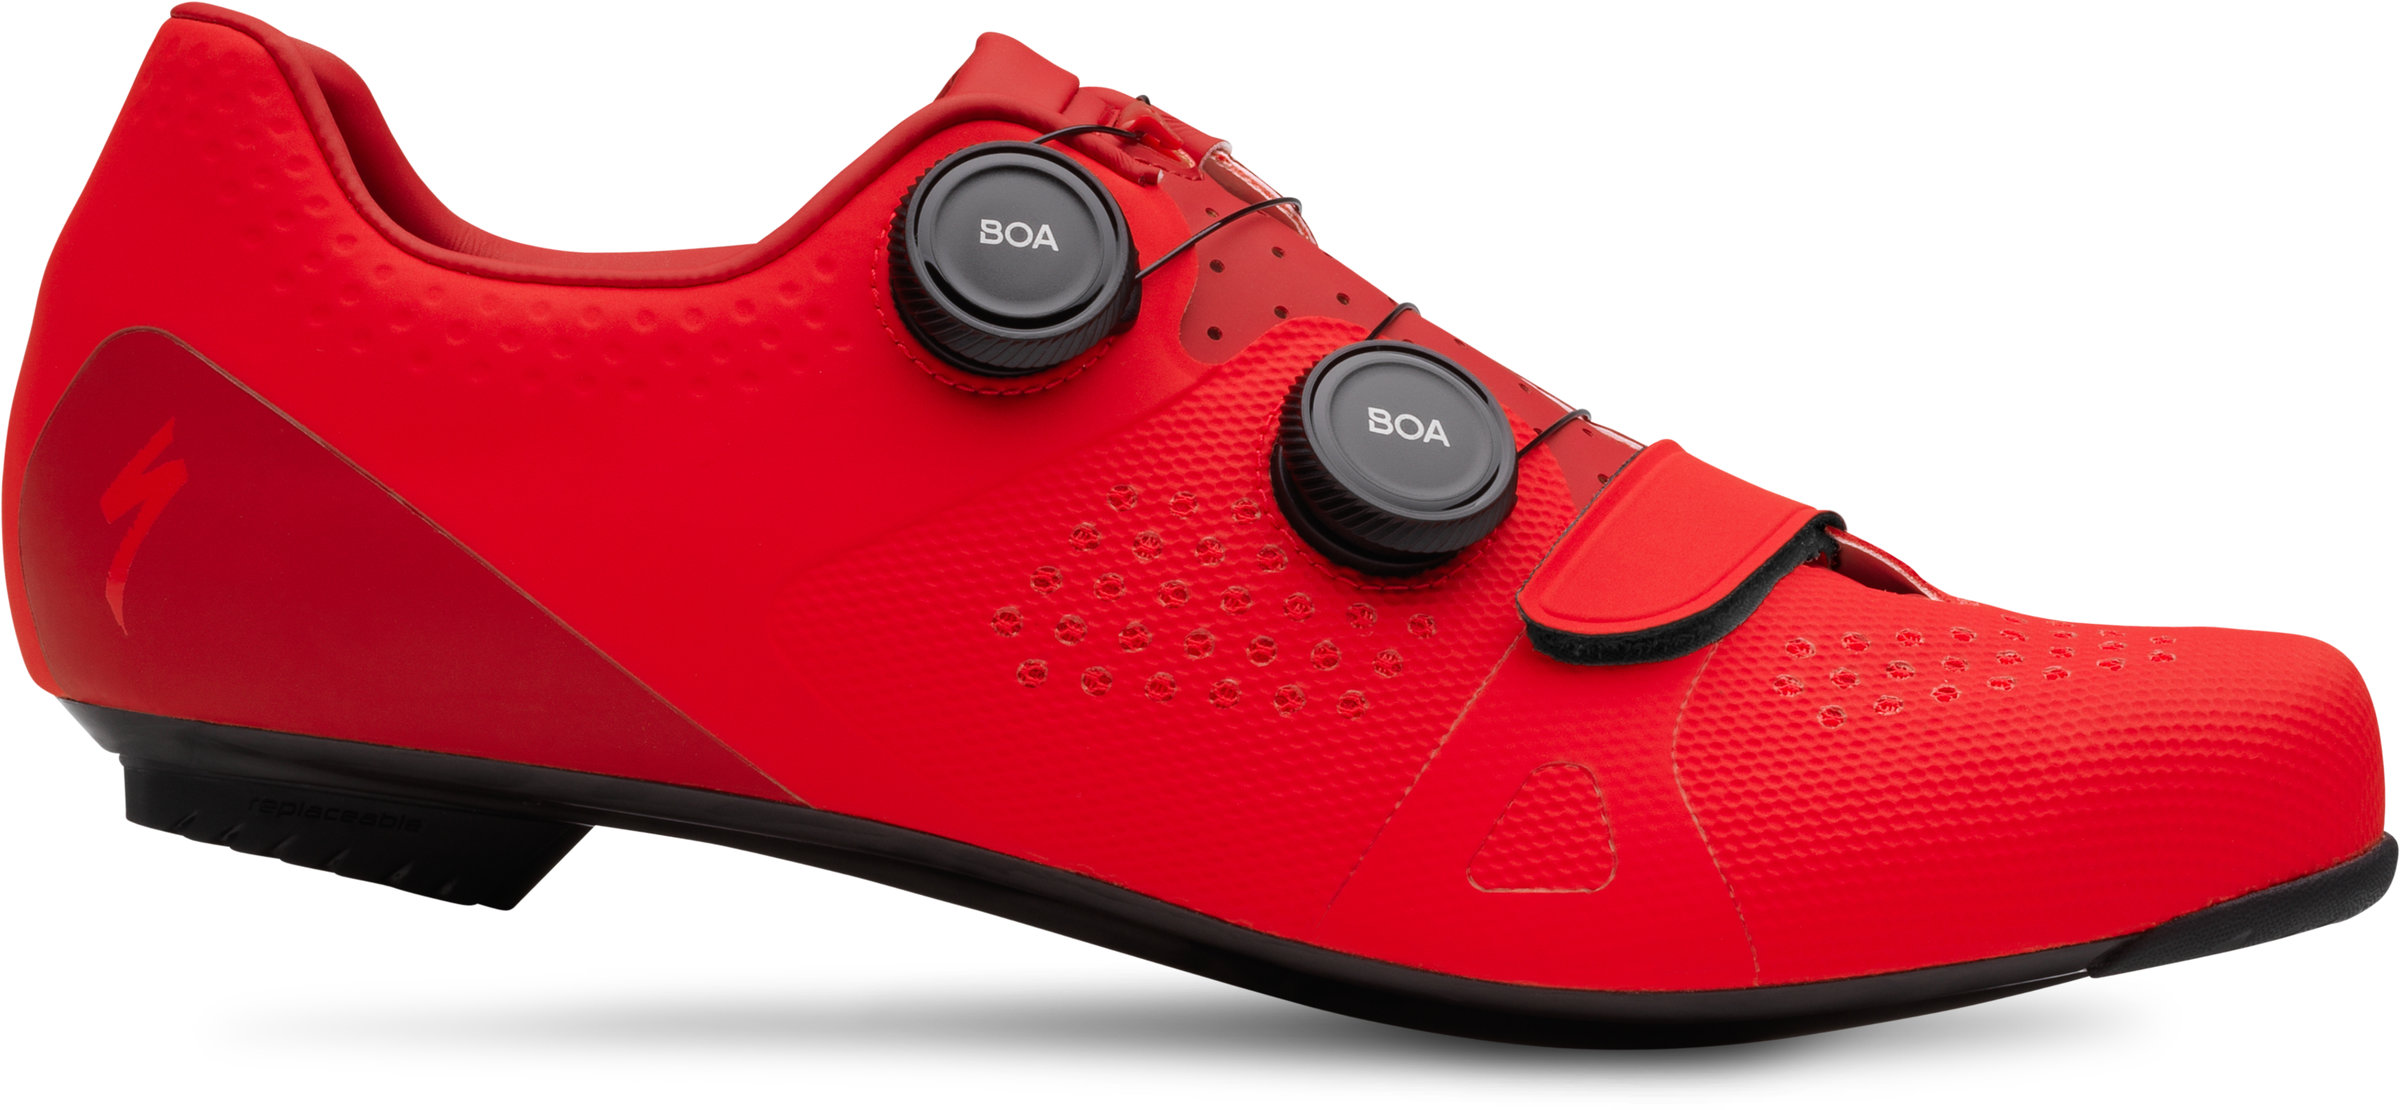 road bike shoes review 219